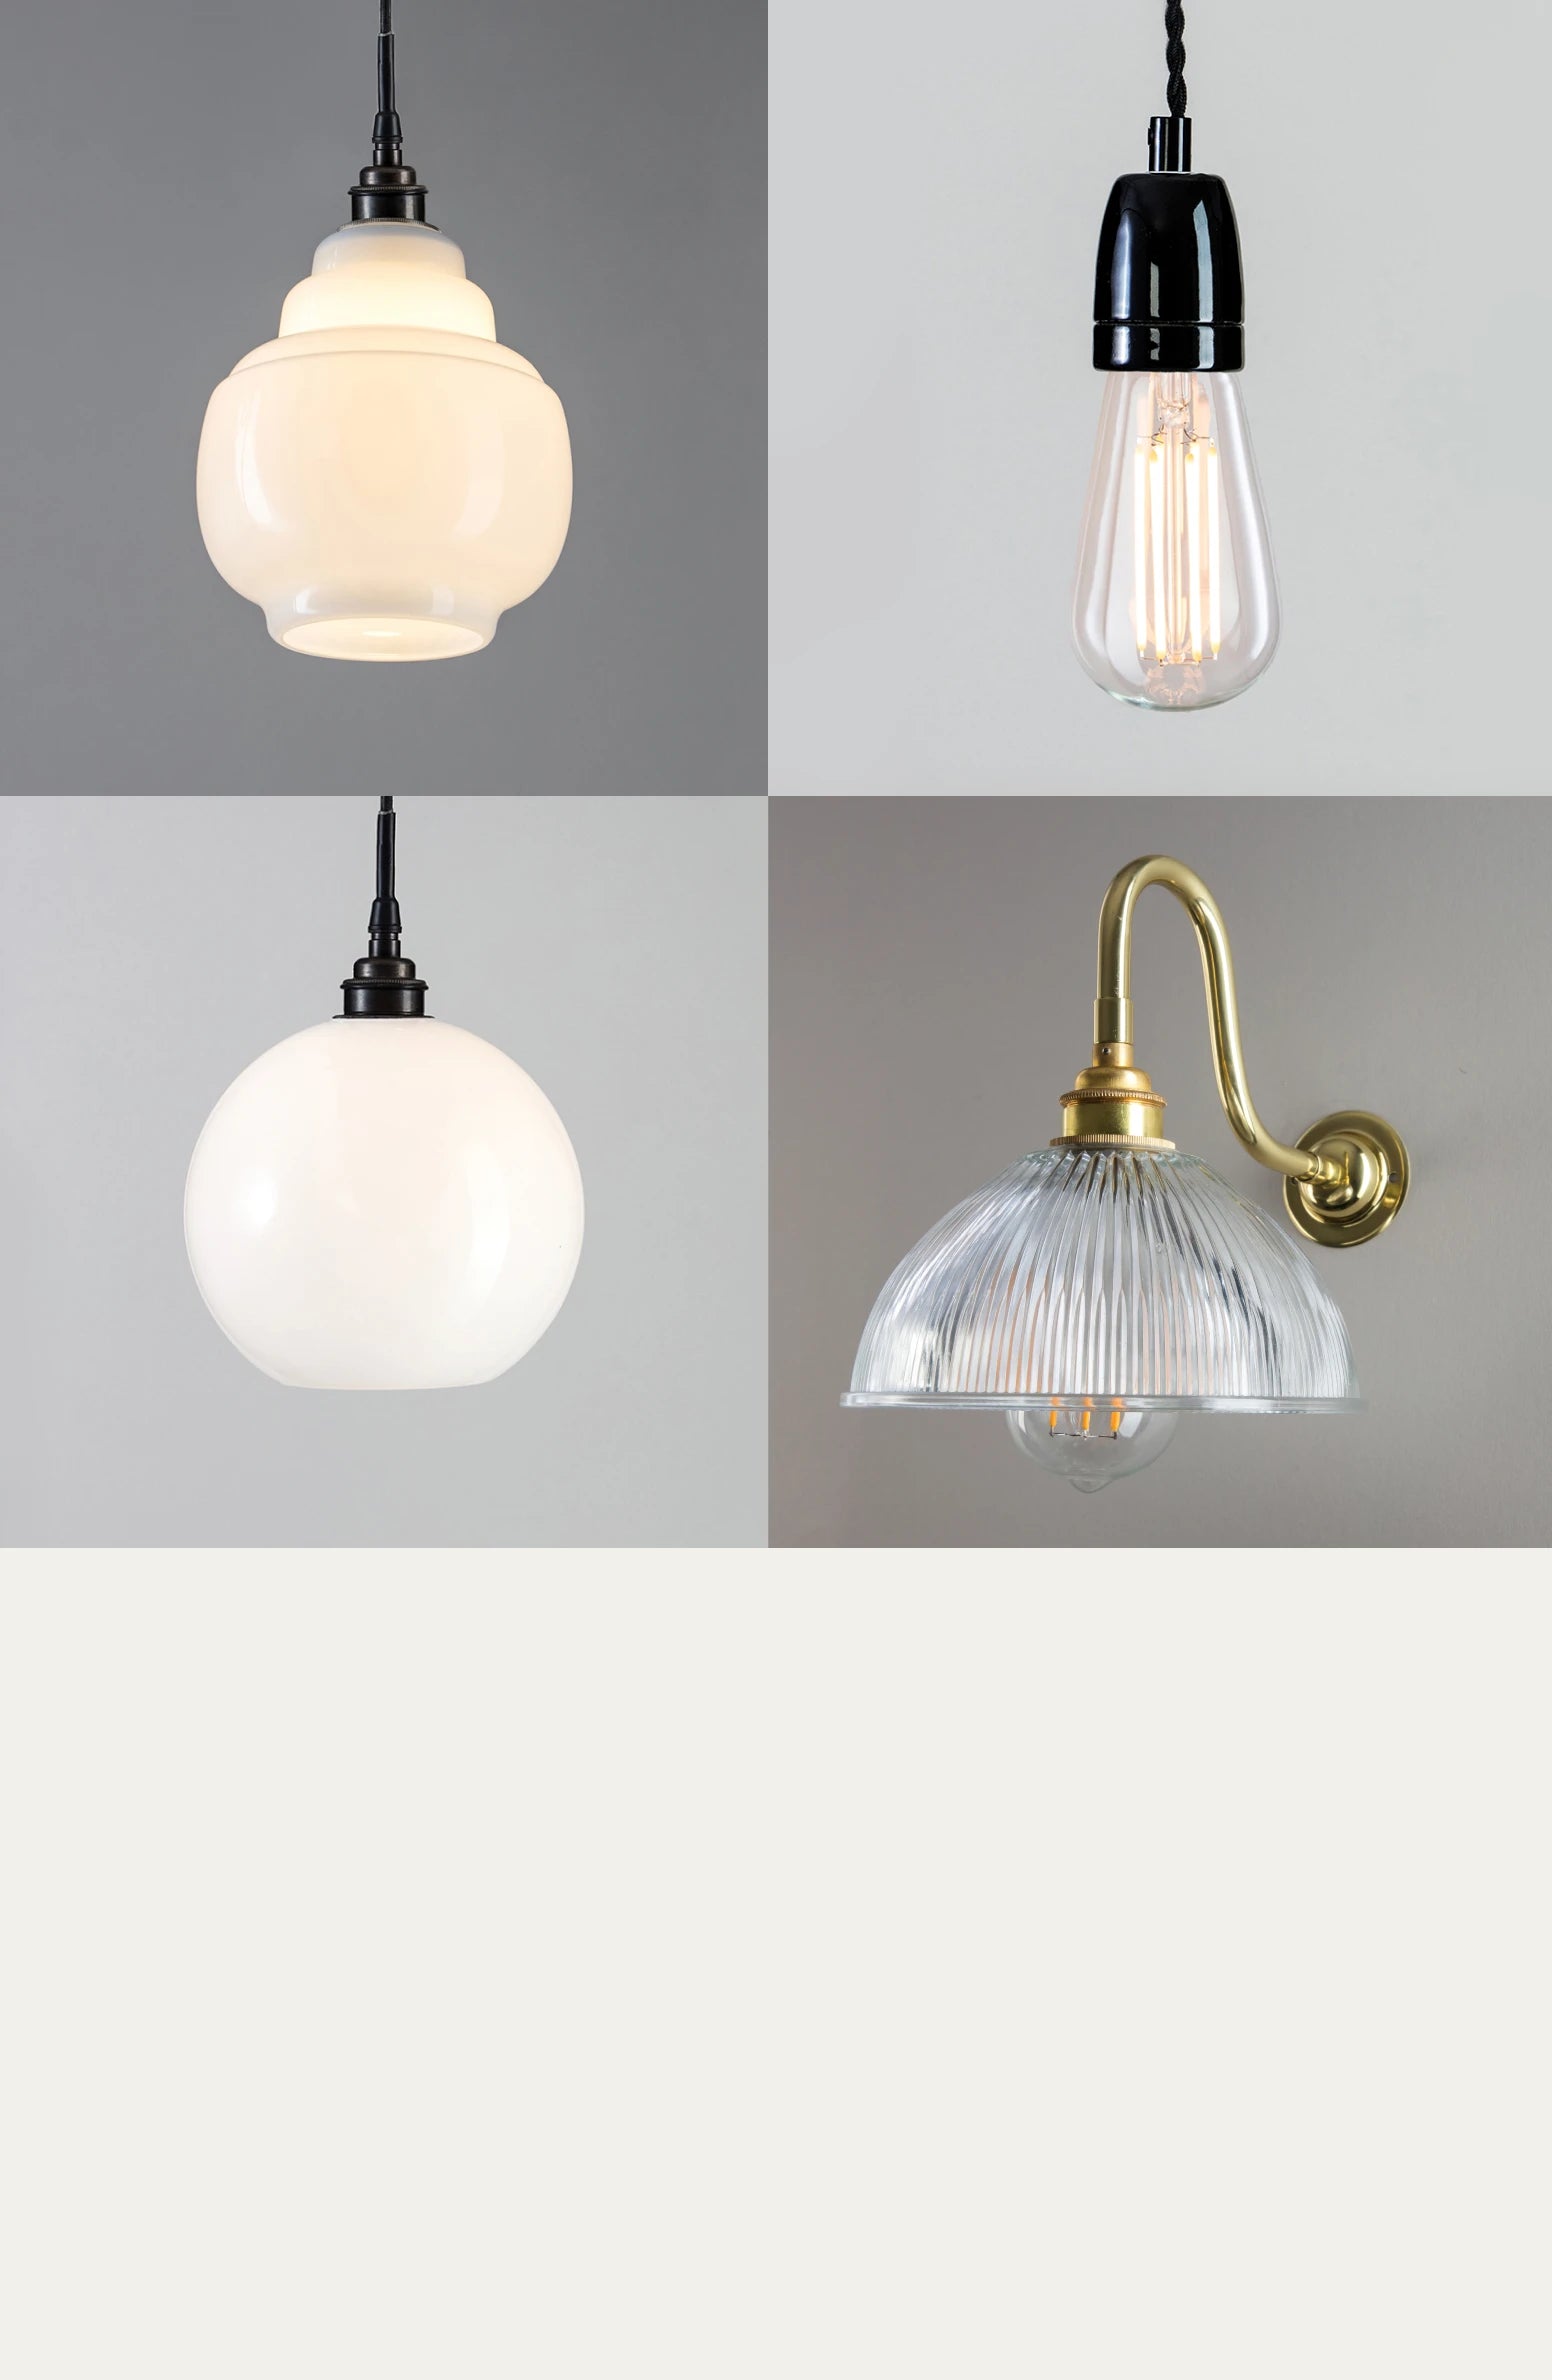 A collage of different types of light fixtures.